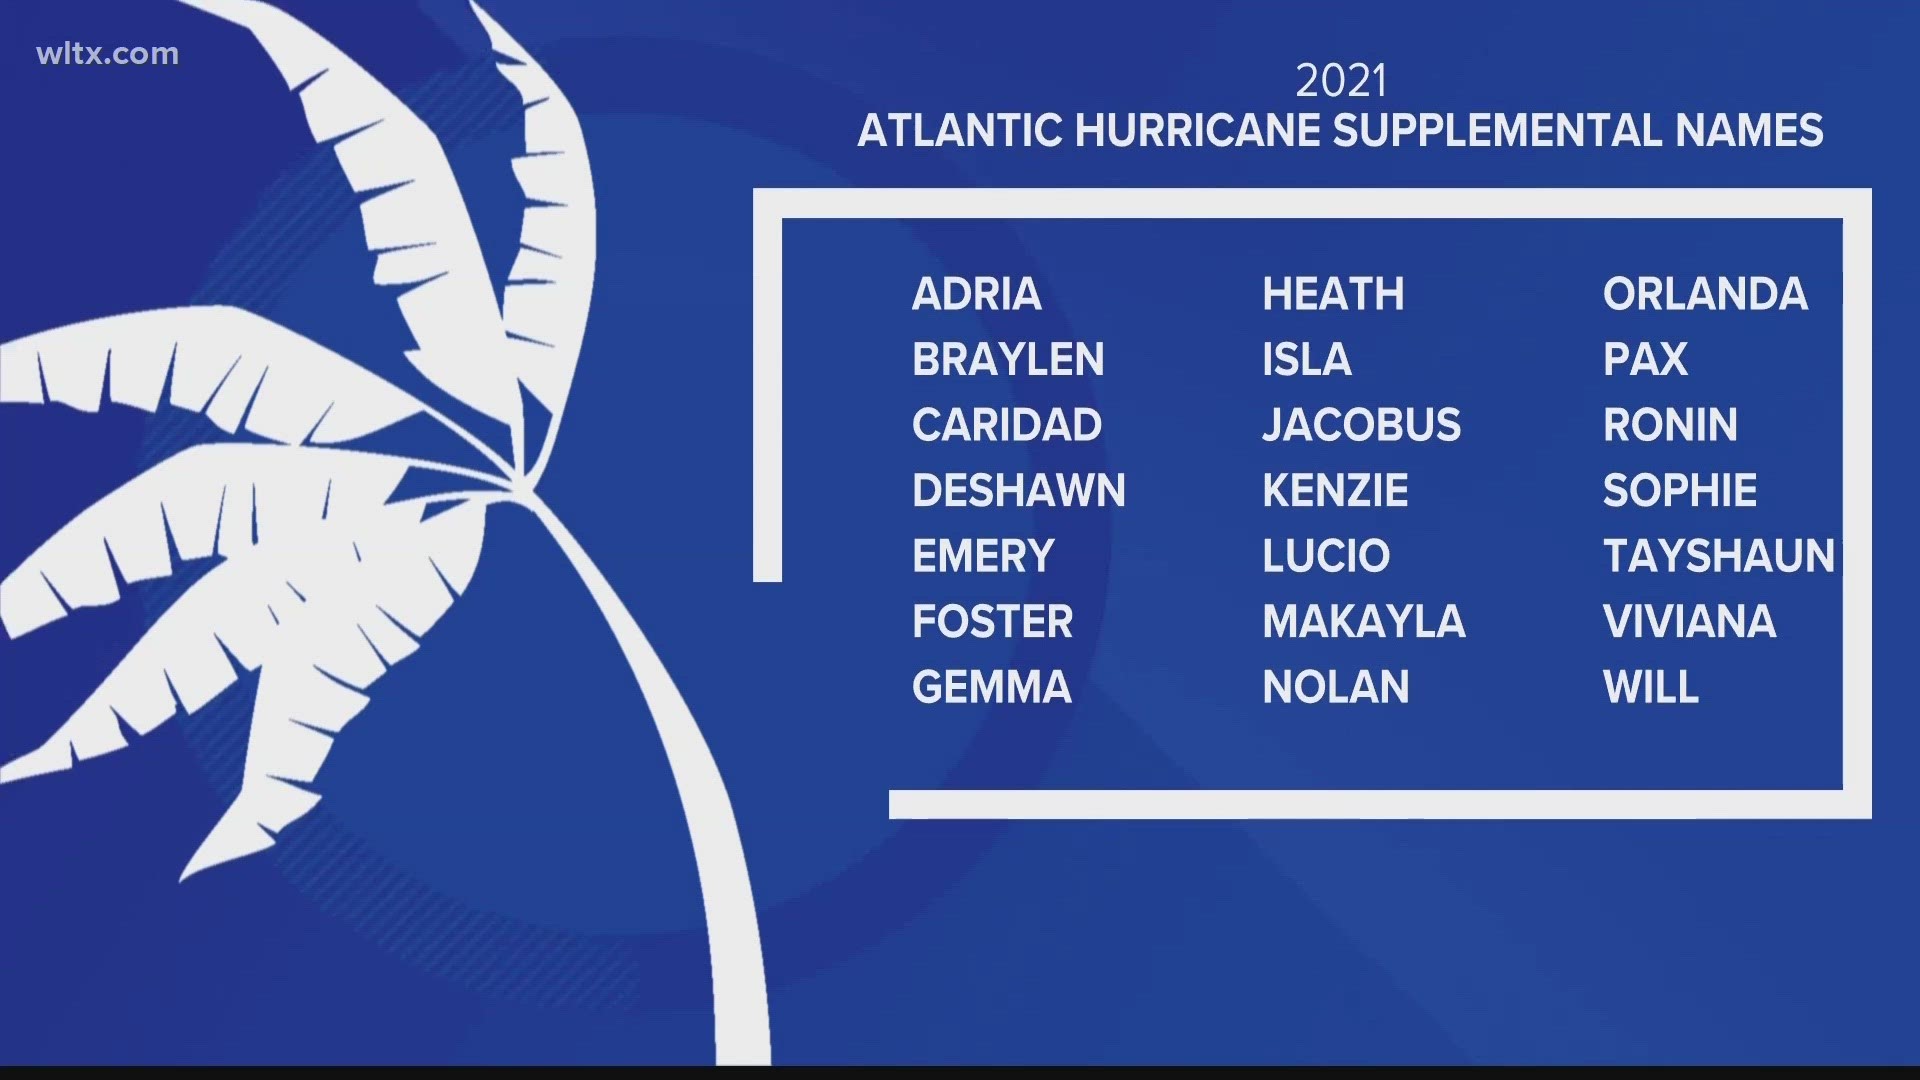 Only in 2005 and 2020 were all 21 names exhausted, prompting the use of the Greek alphabet to name additional storms-then these-Adria, Braylen, Caridad, Deshawn, Wil